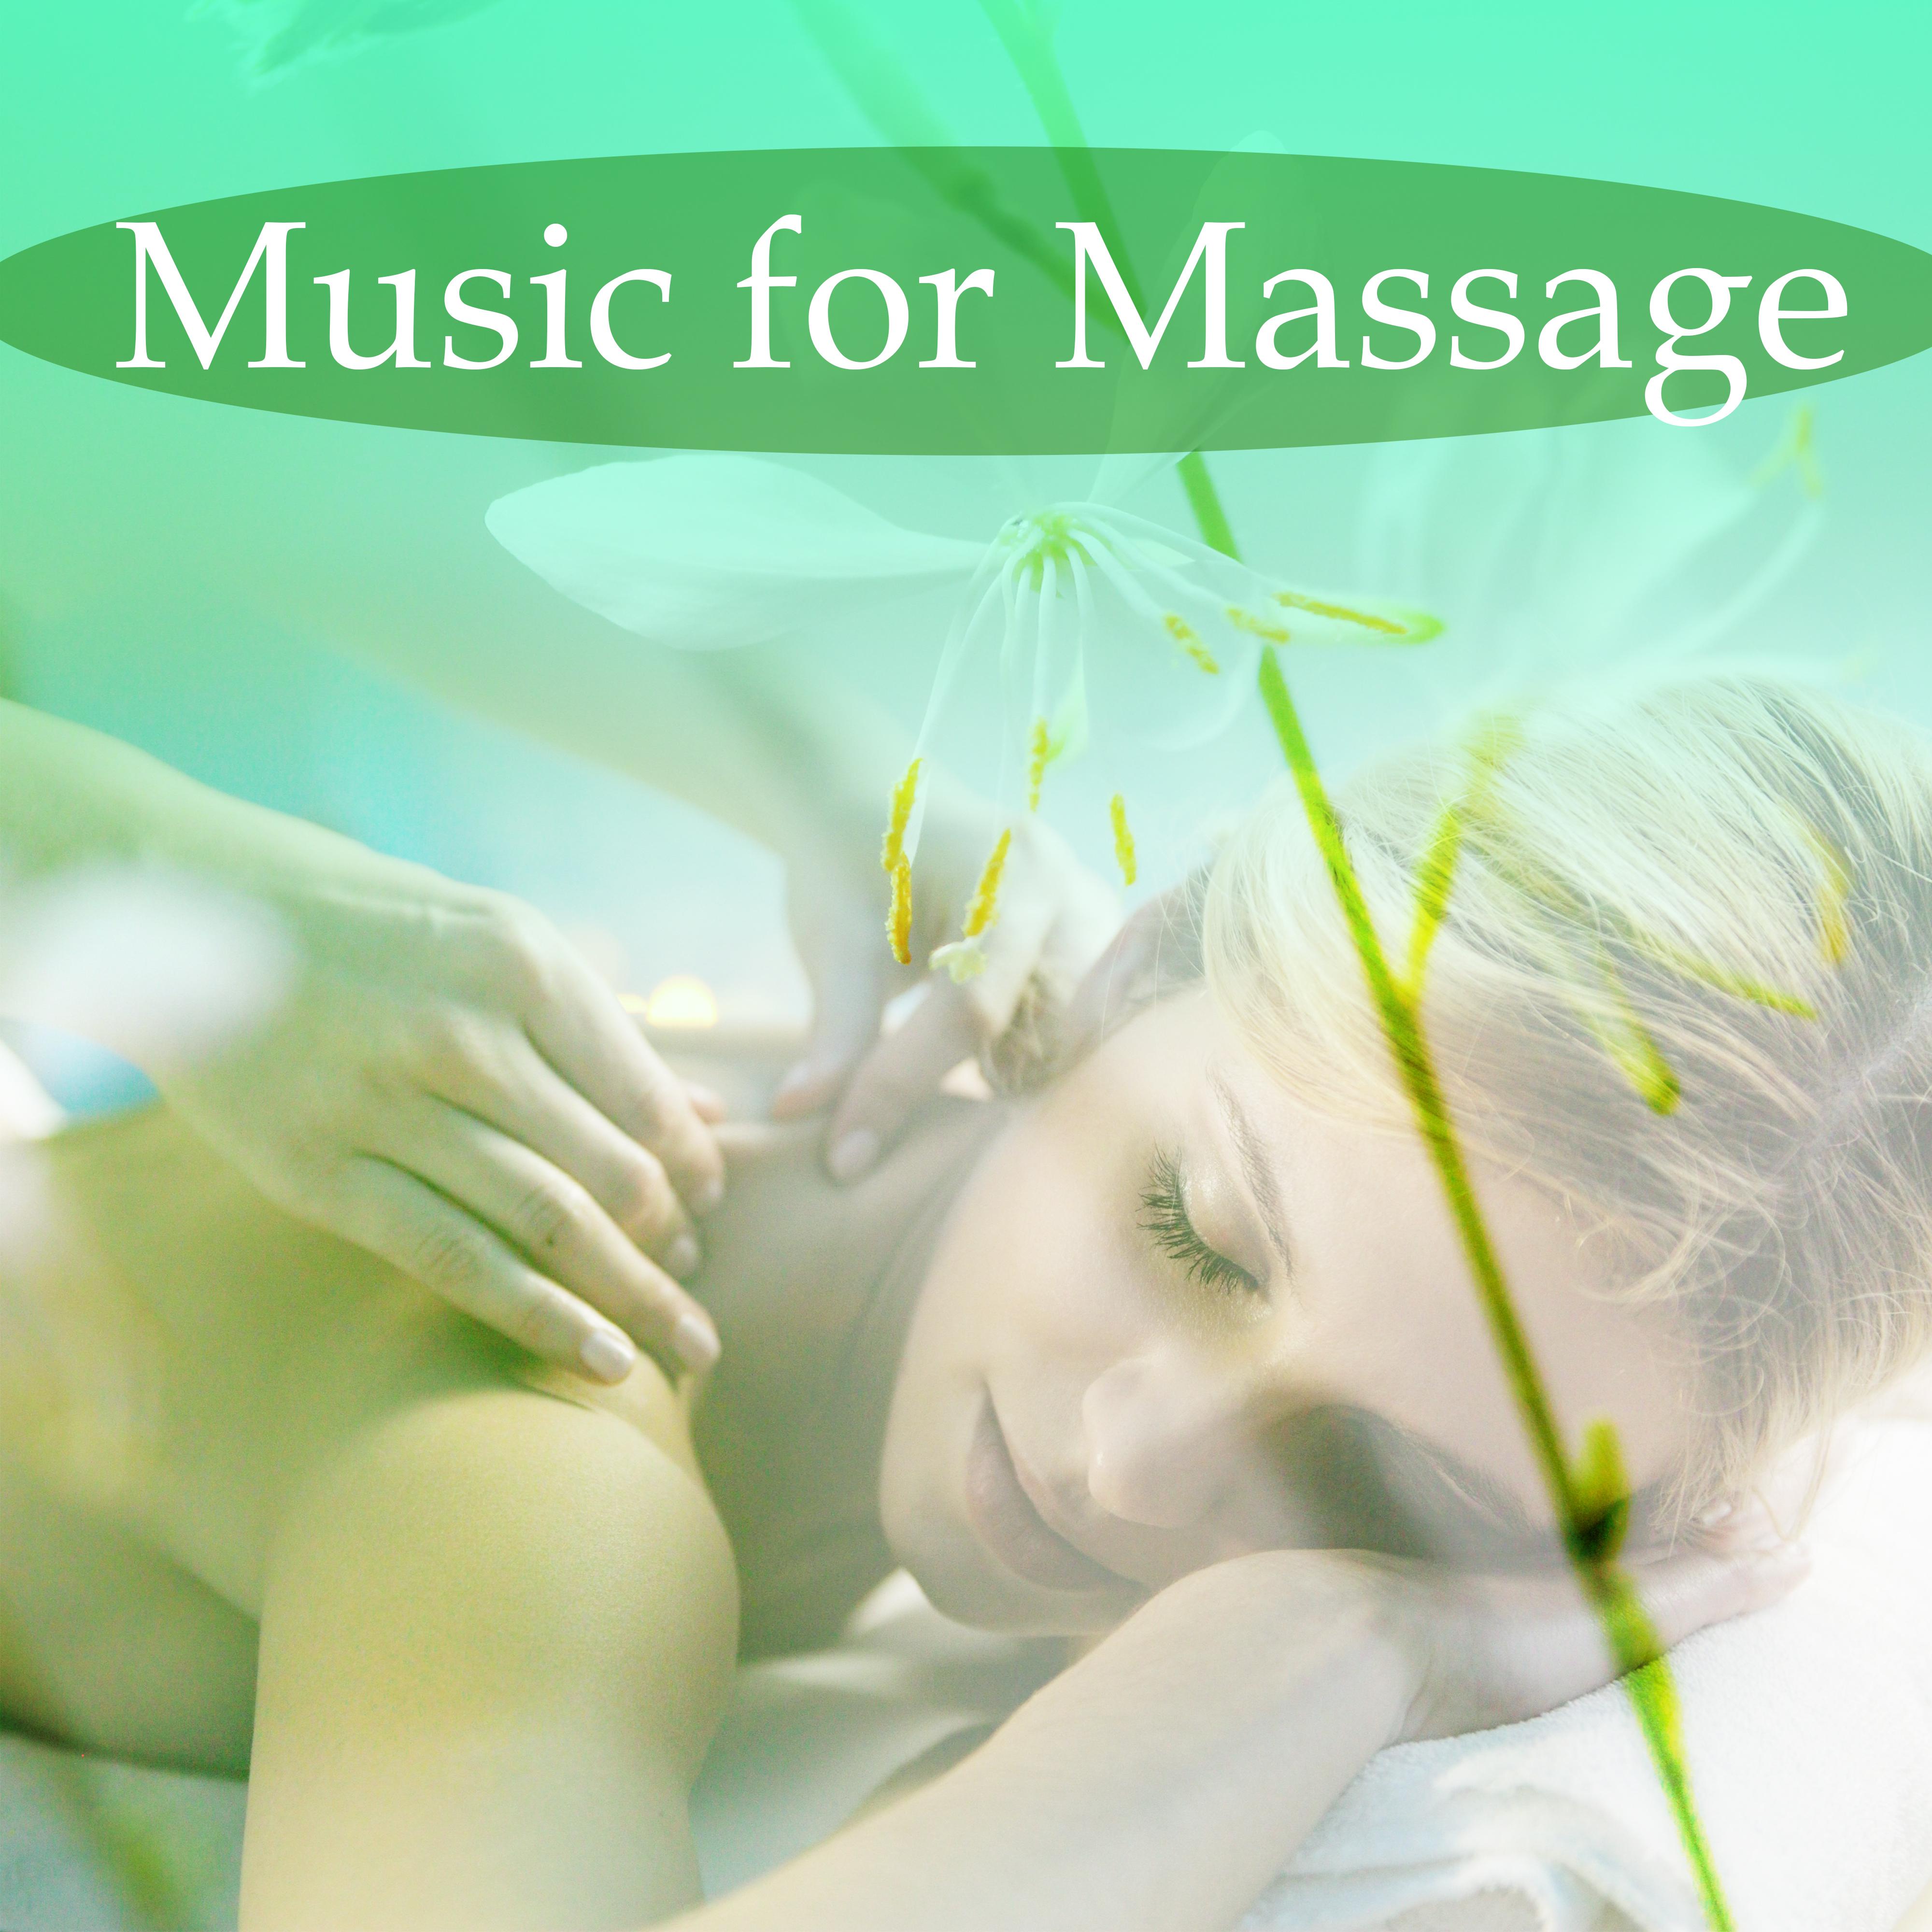 Music for Massage – Soothing Guitar, Pure Sleep, Spa Music, Wellness, Relief, Stress Free, Spa Dreams